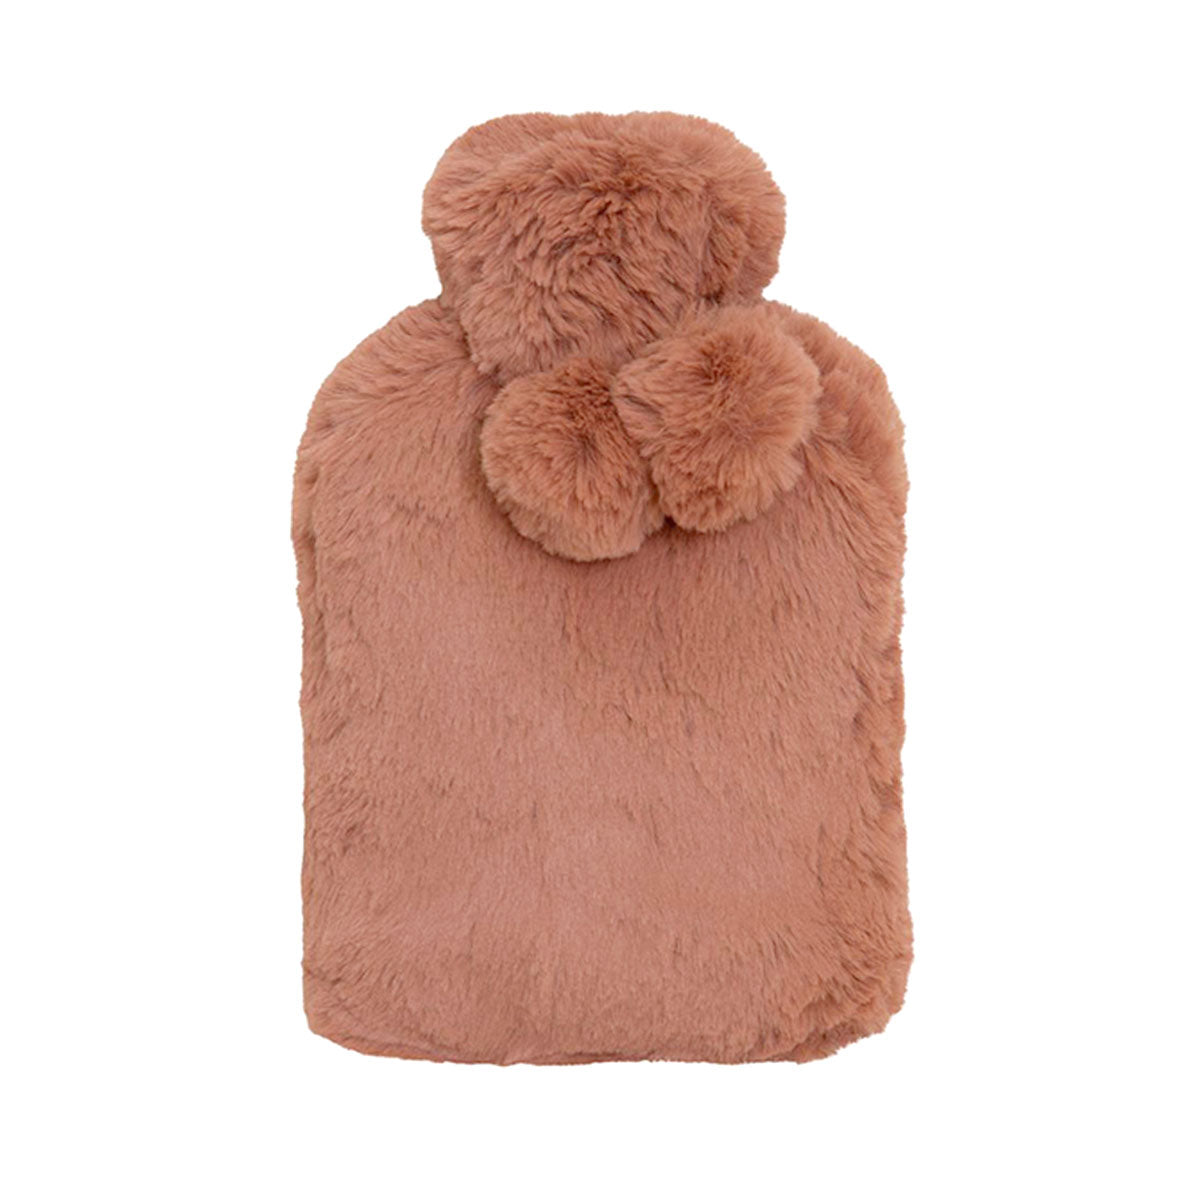 Amara Hot Water Bottle with Super Plush Faux Fur Cover Clay Pink